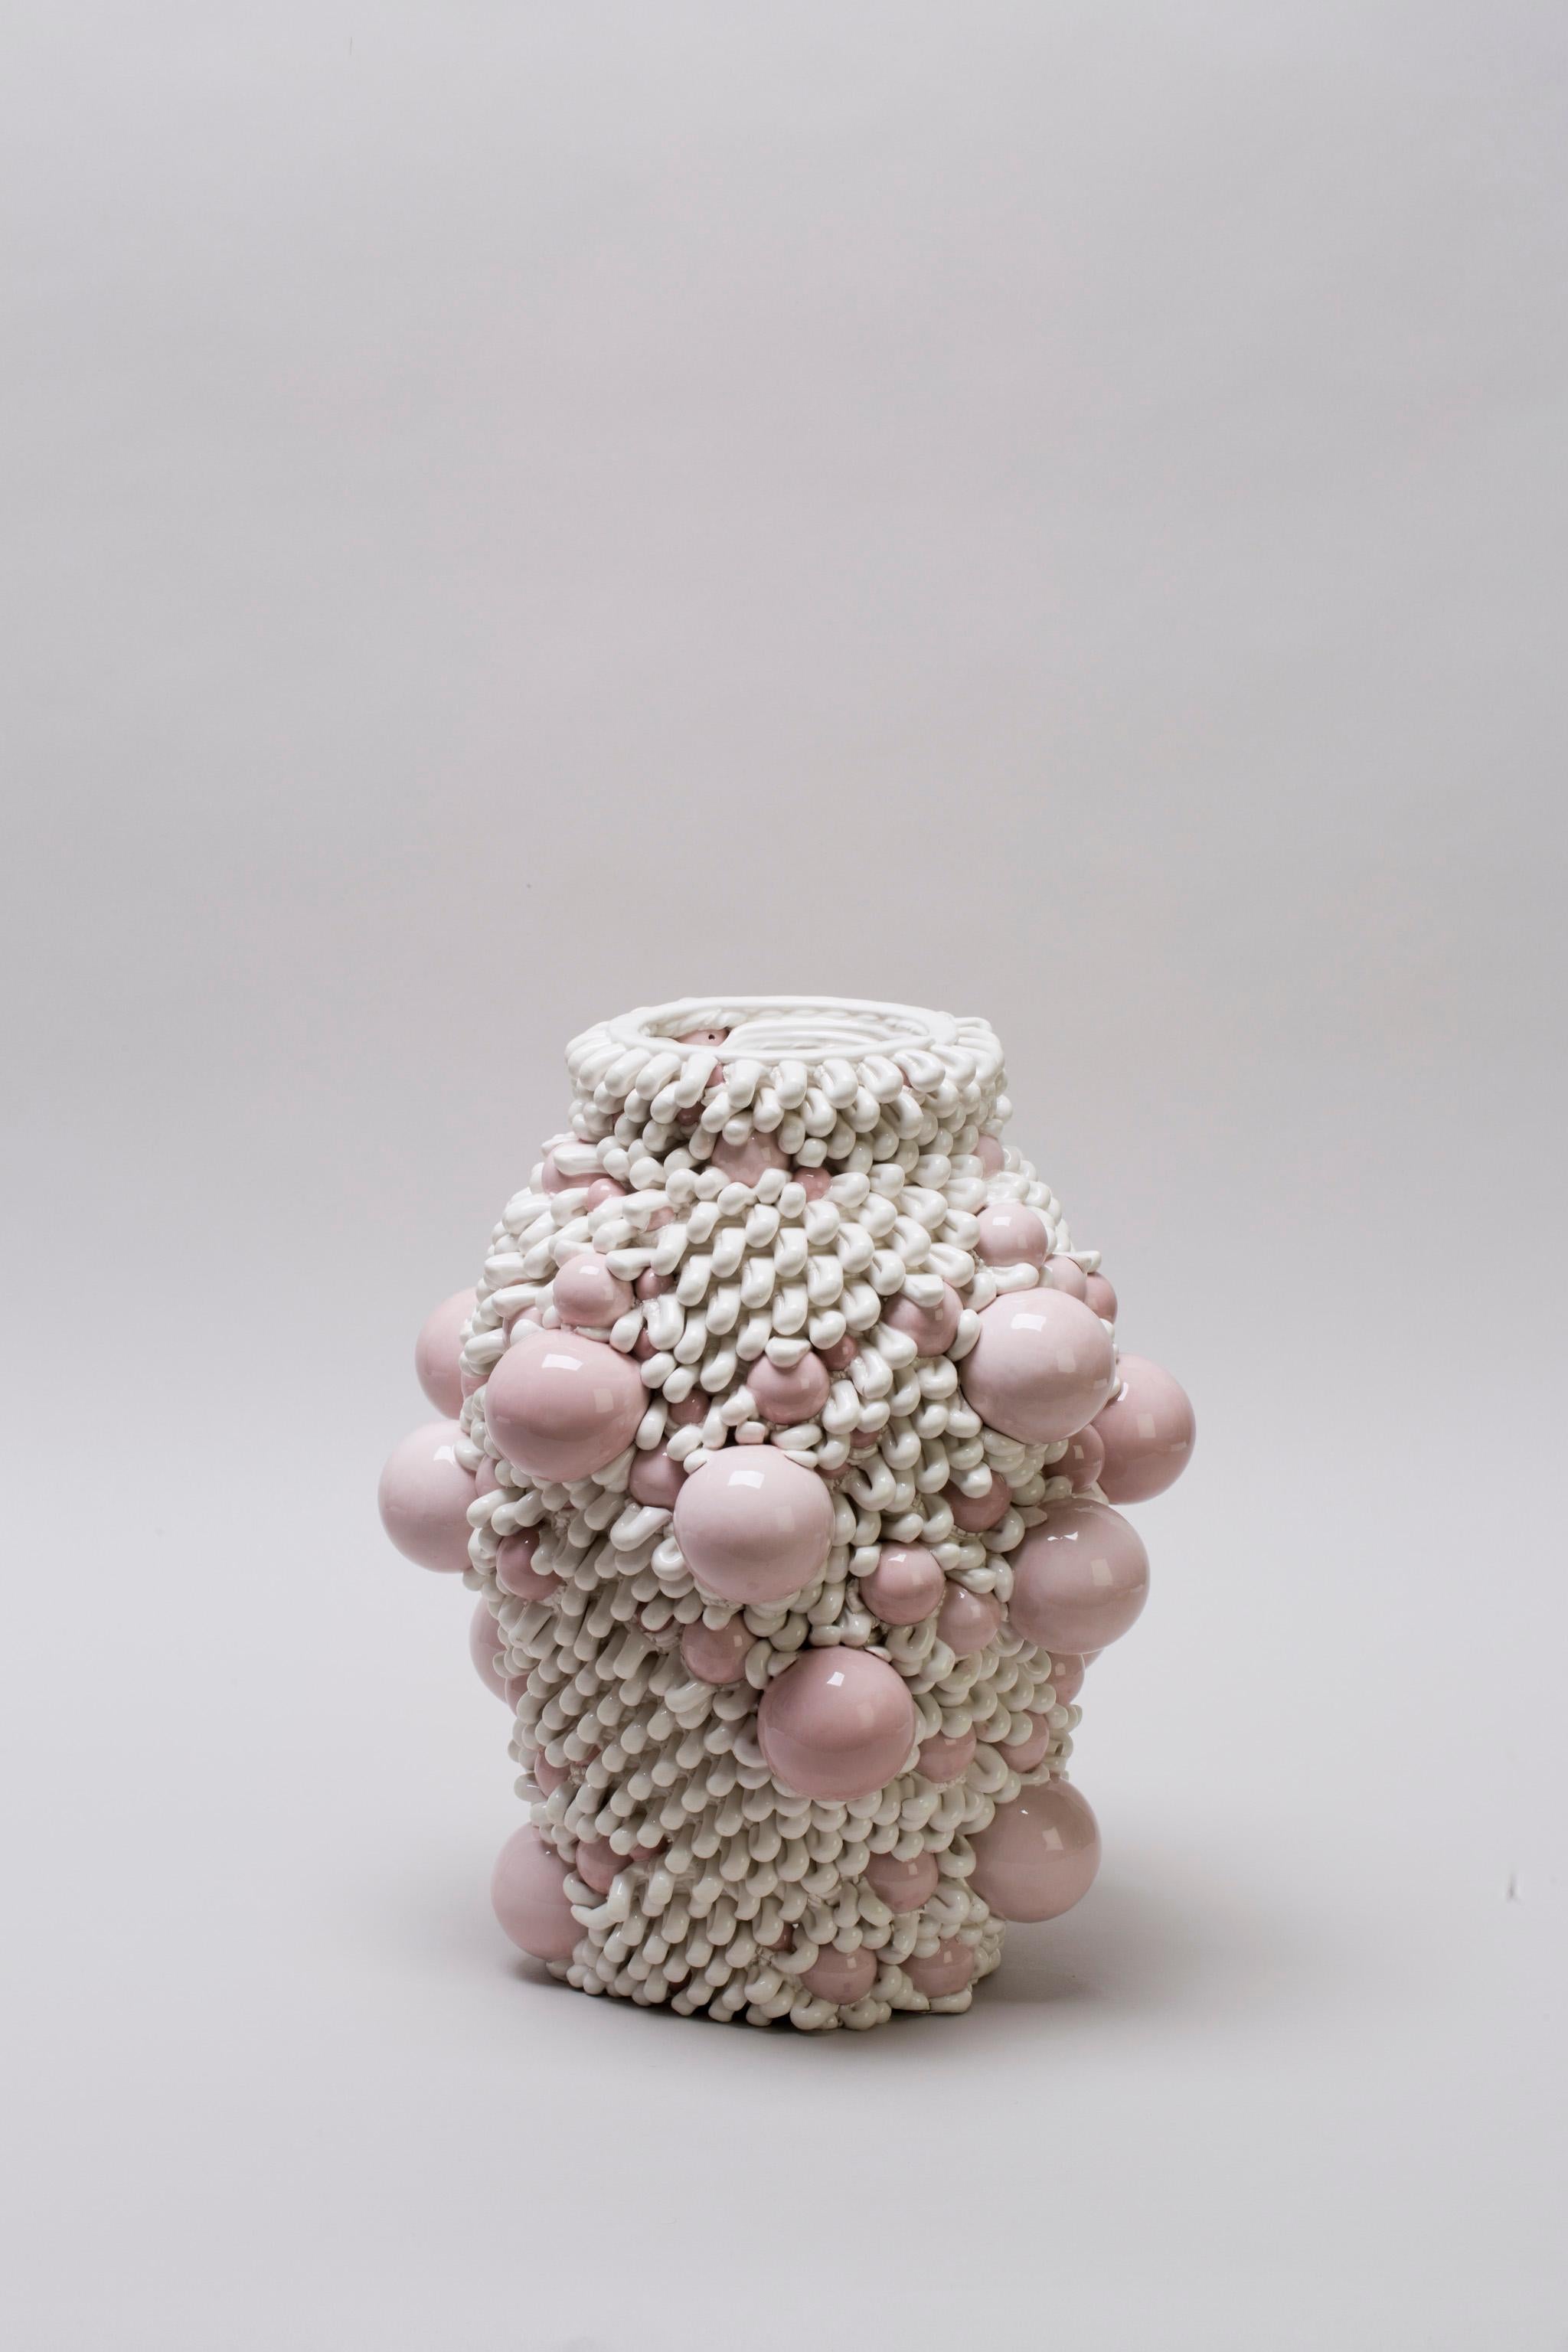 Modern White 3D Printed Ceramic Sculptural Vase Italy Contemporary, 21st Century For Sale